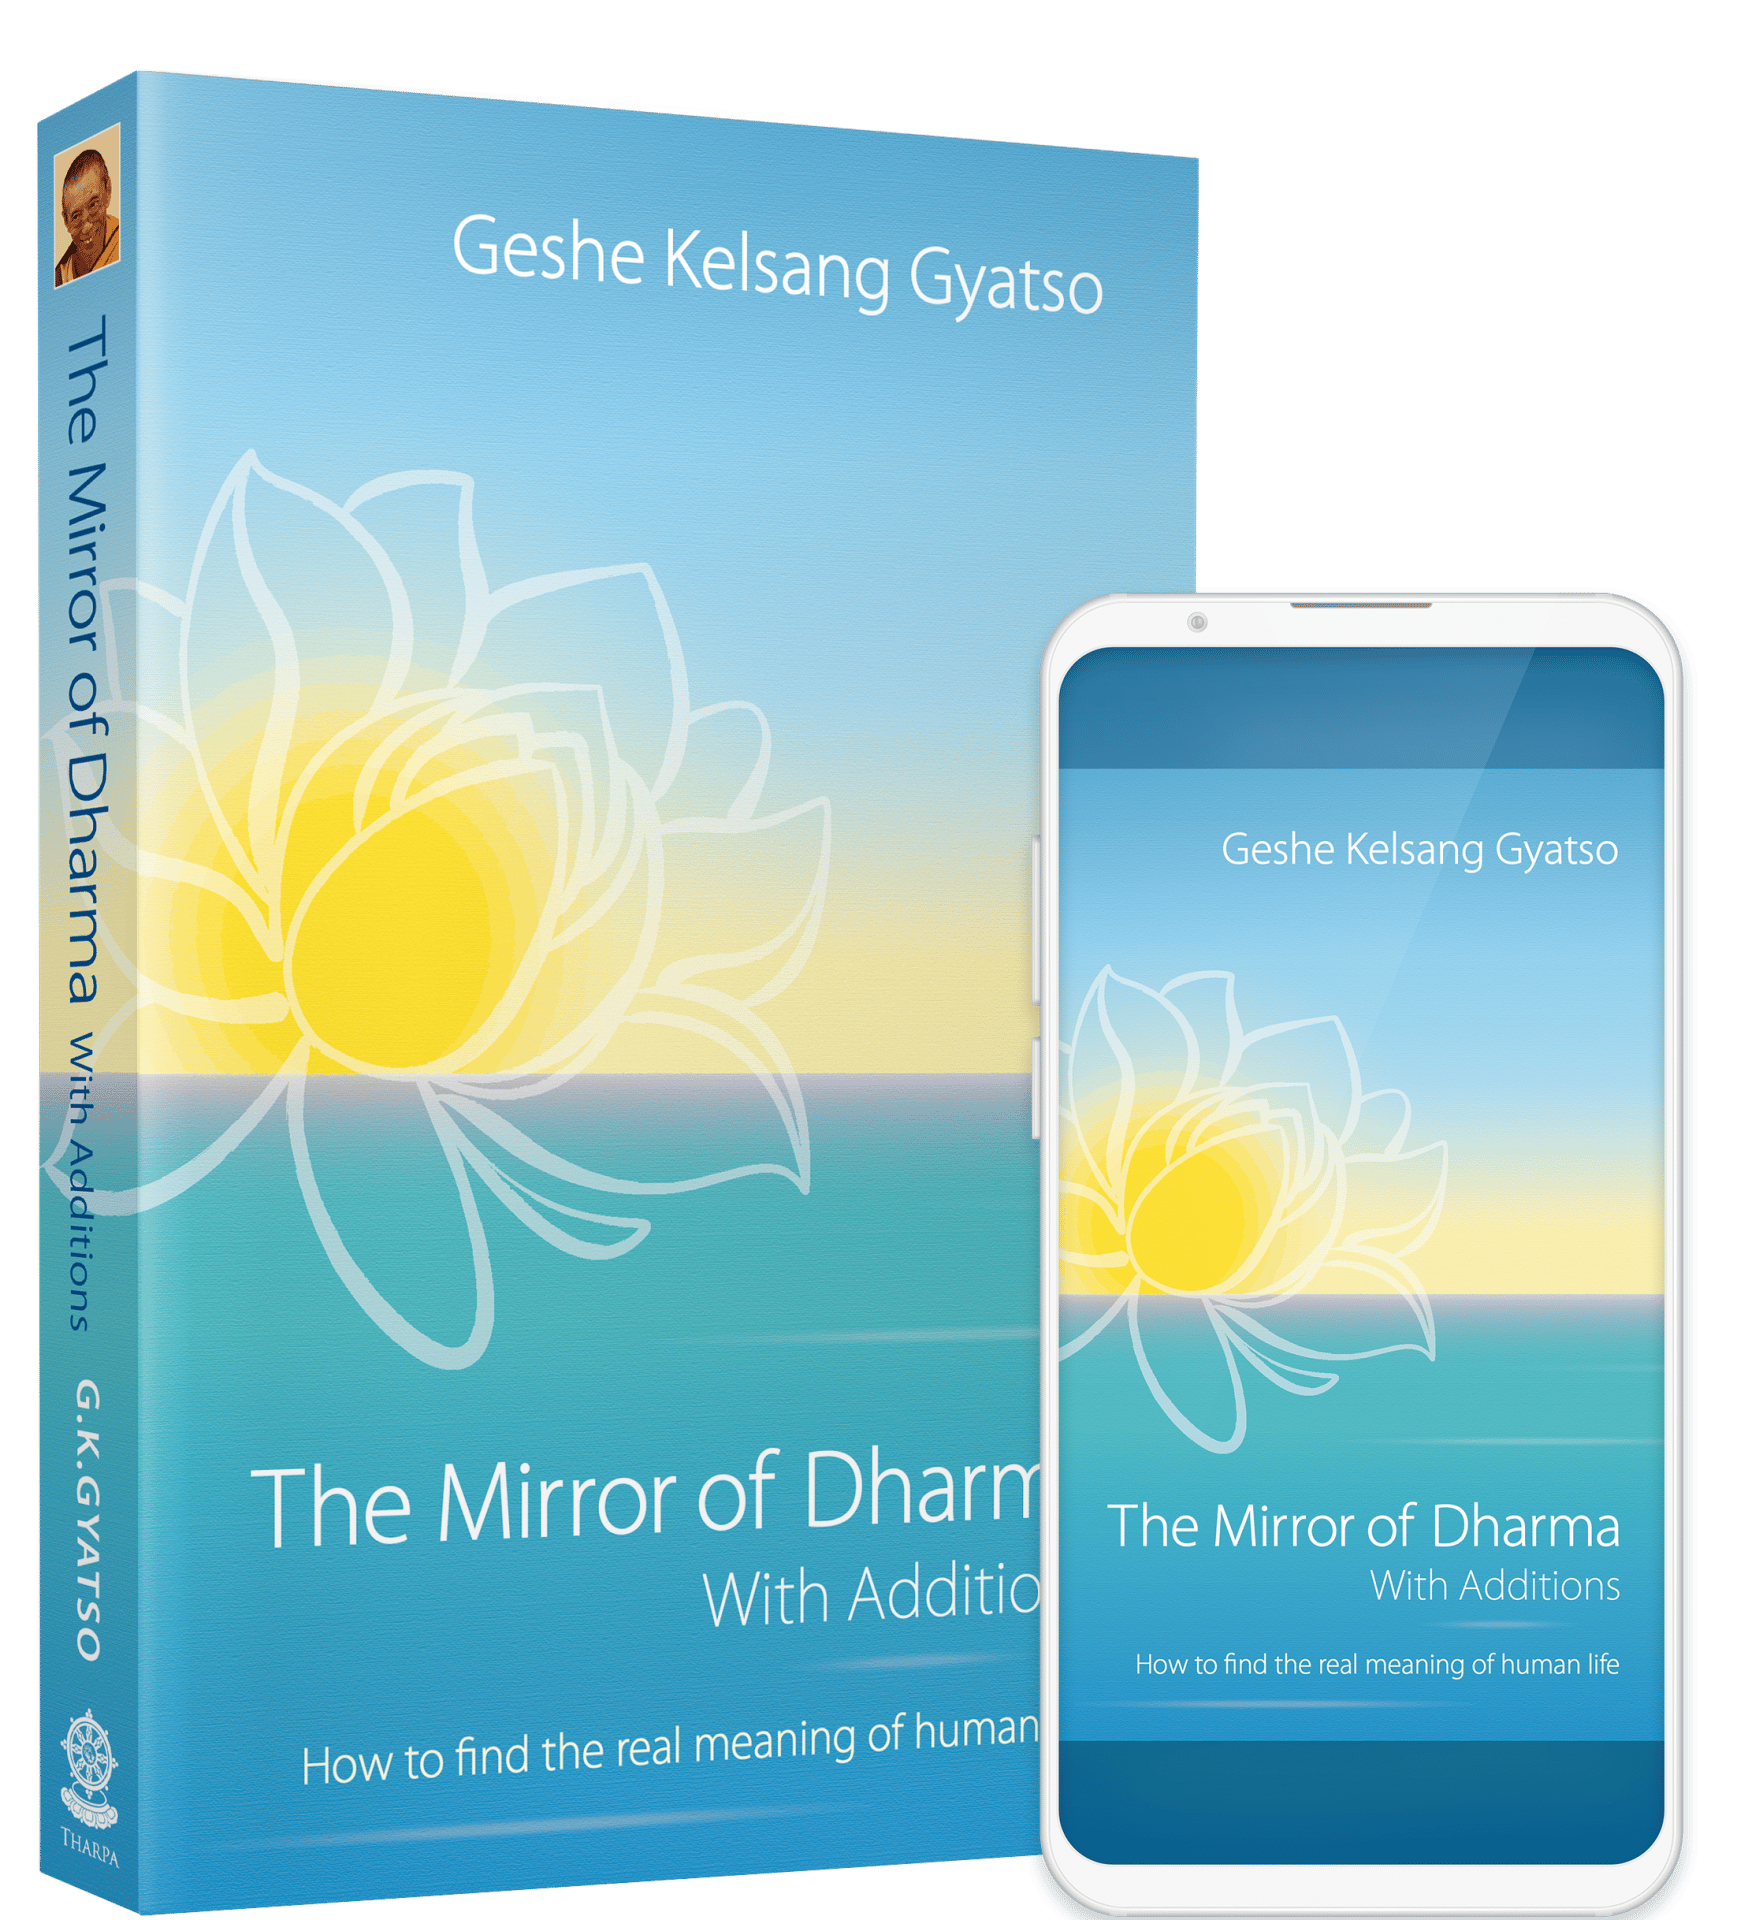 Mirror-of-Dharma-with-Additions_3D-Paperback-Front_and_Ebook-Phone-Android-Cover_Combo_2019-04-1-e1567996544774